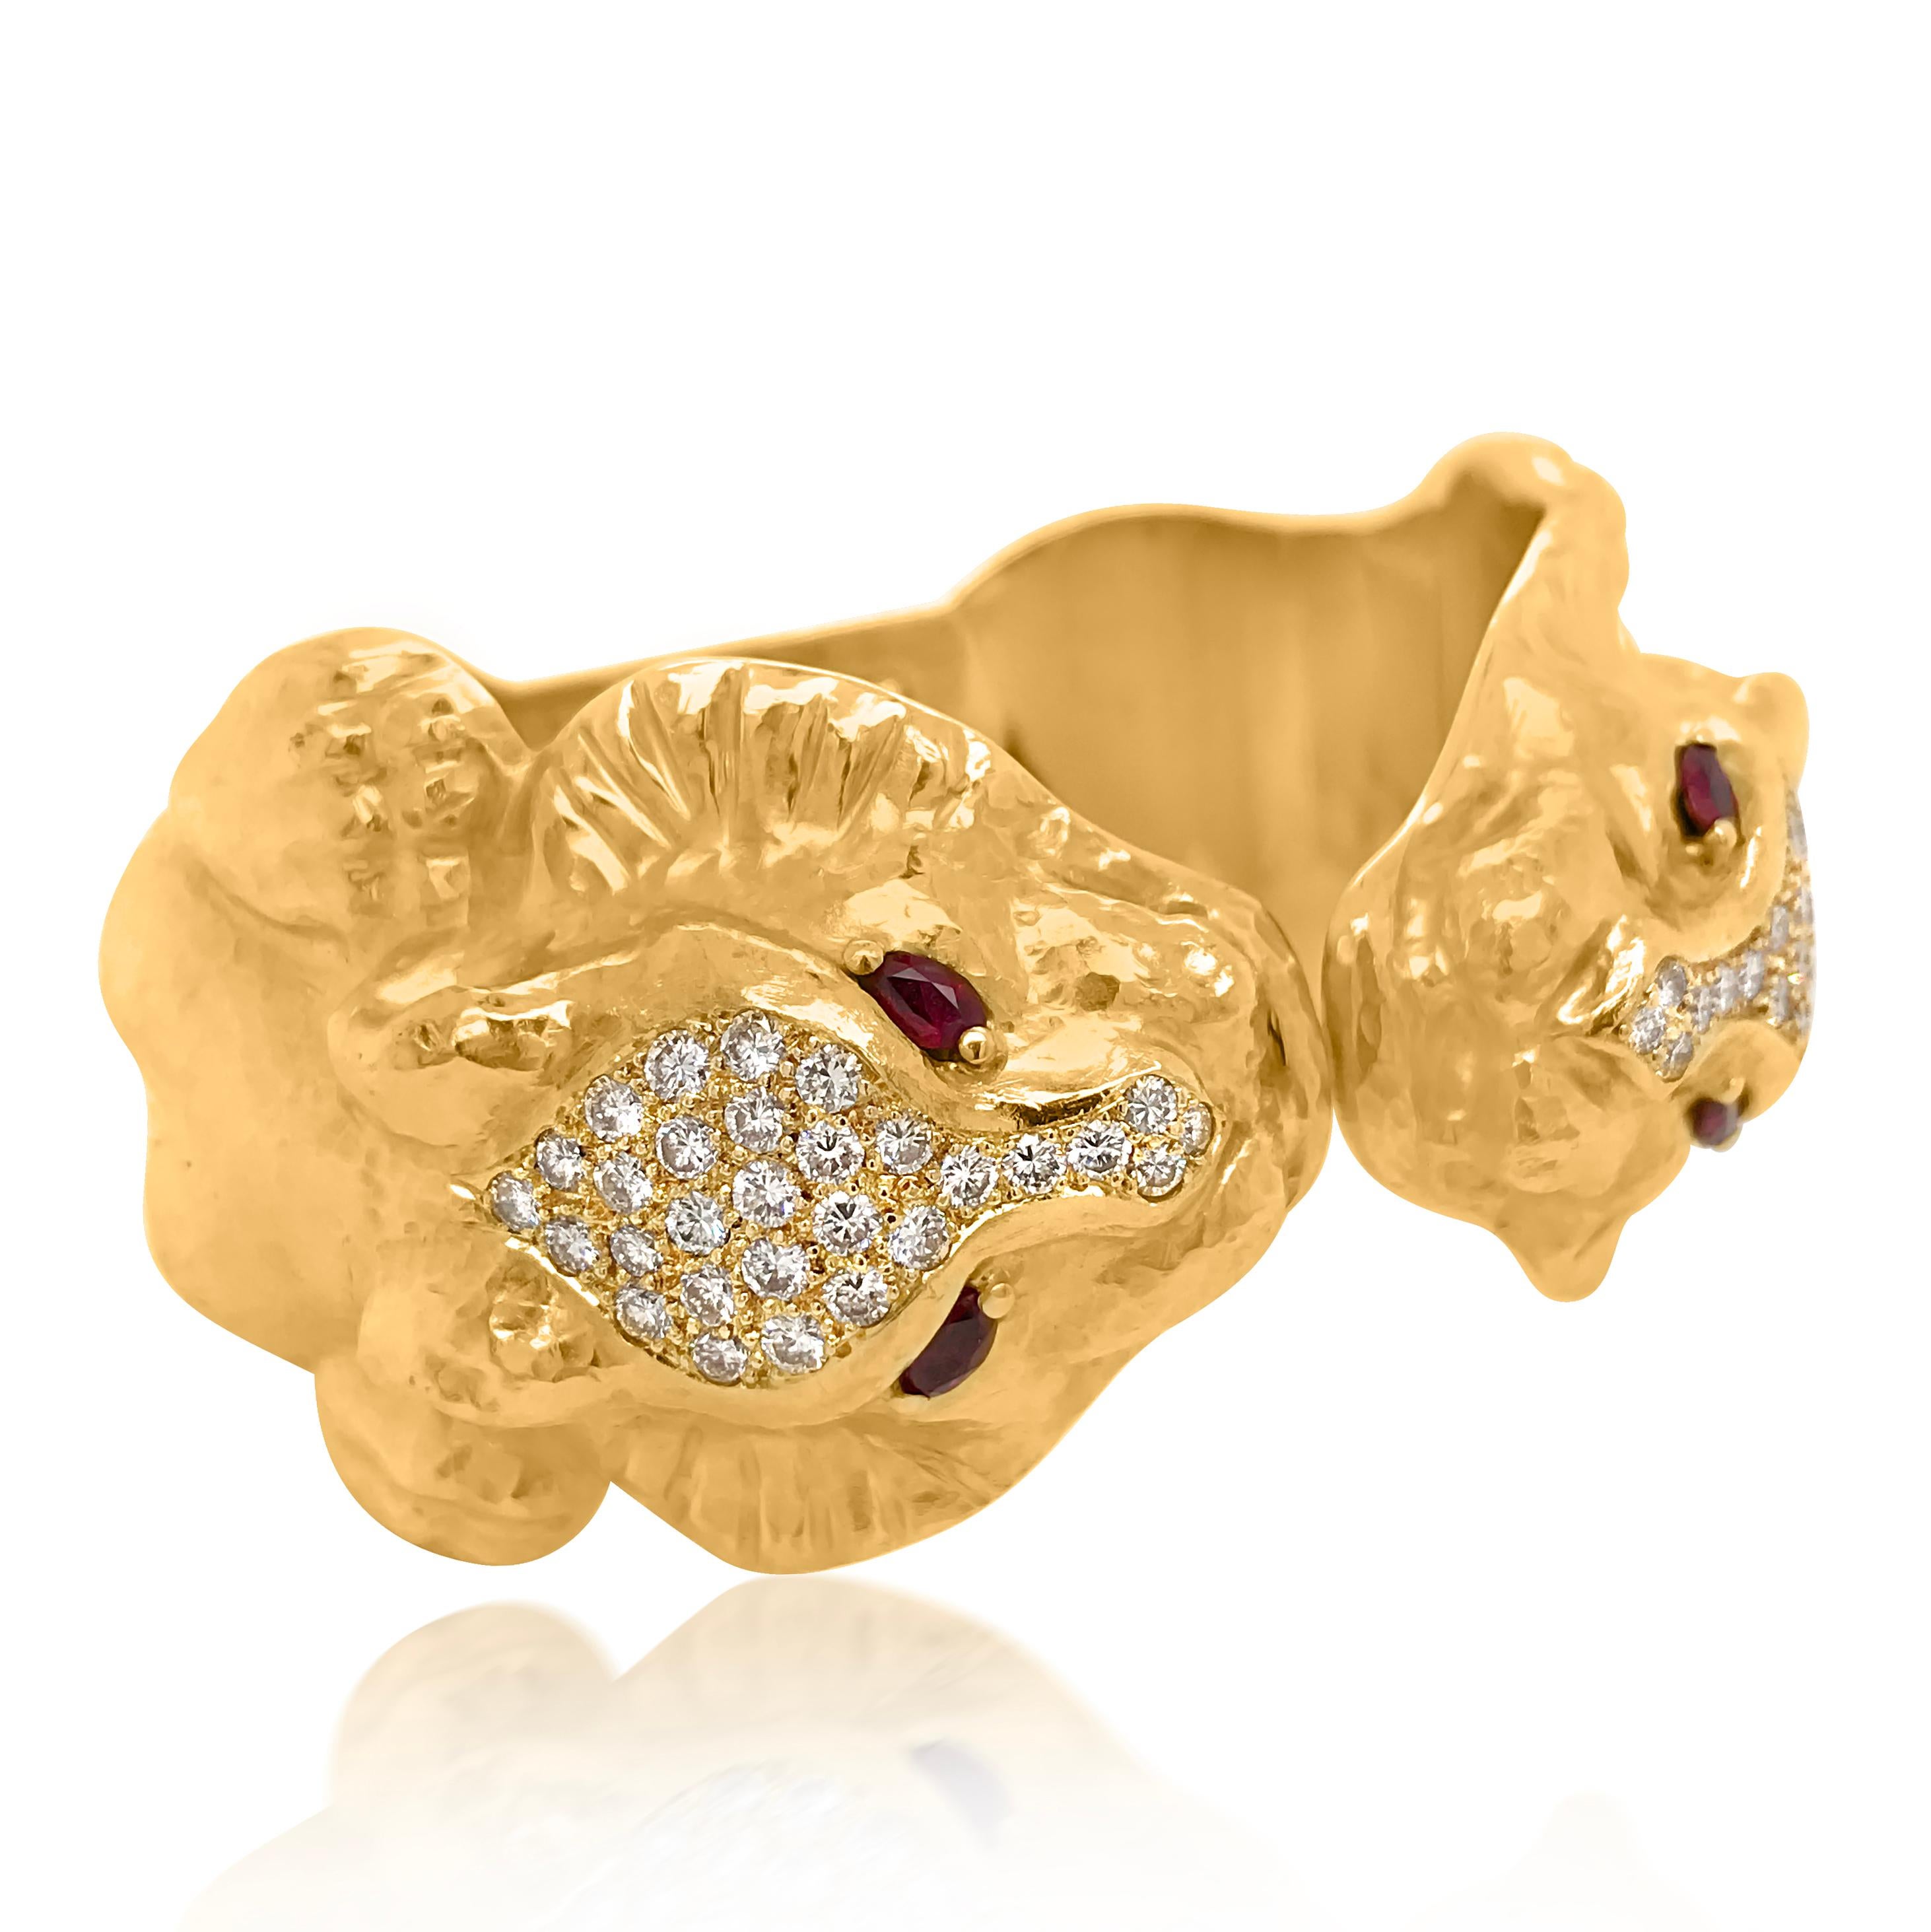 This vintage cuff bangle bracelet is hinged hammered gold cuff terminating in a pair of lion heads, centering fancy-shaped panels pave-set with 58 round diamonds approximately 2.15 cts., accented by 4 marquise-shaped ruby eyes. The bracelet weighs